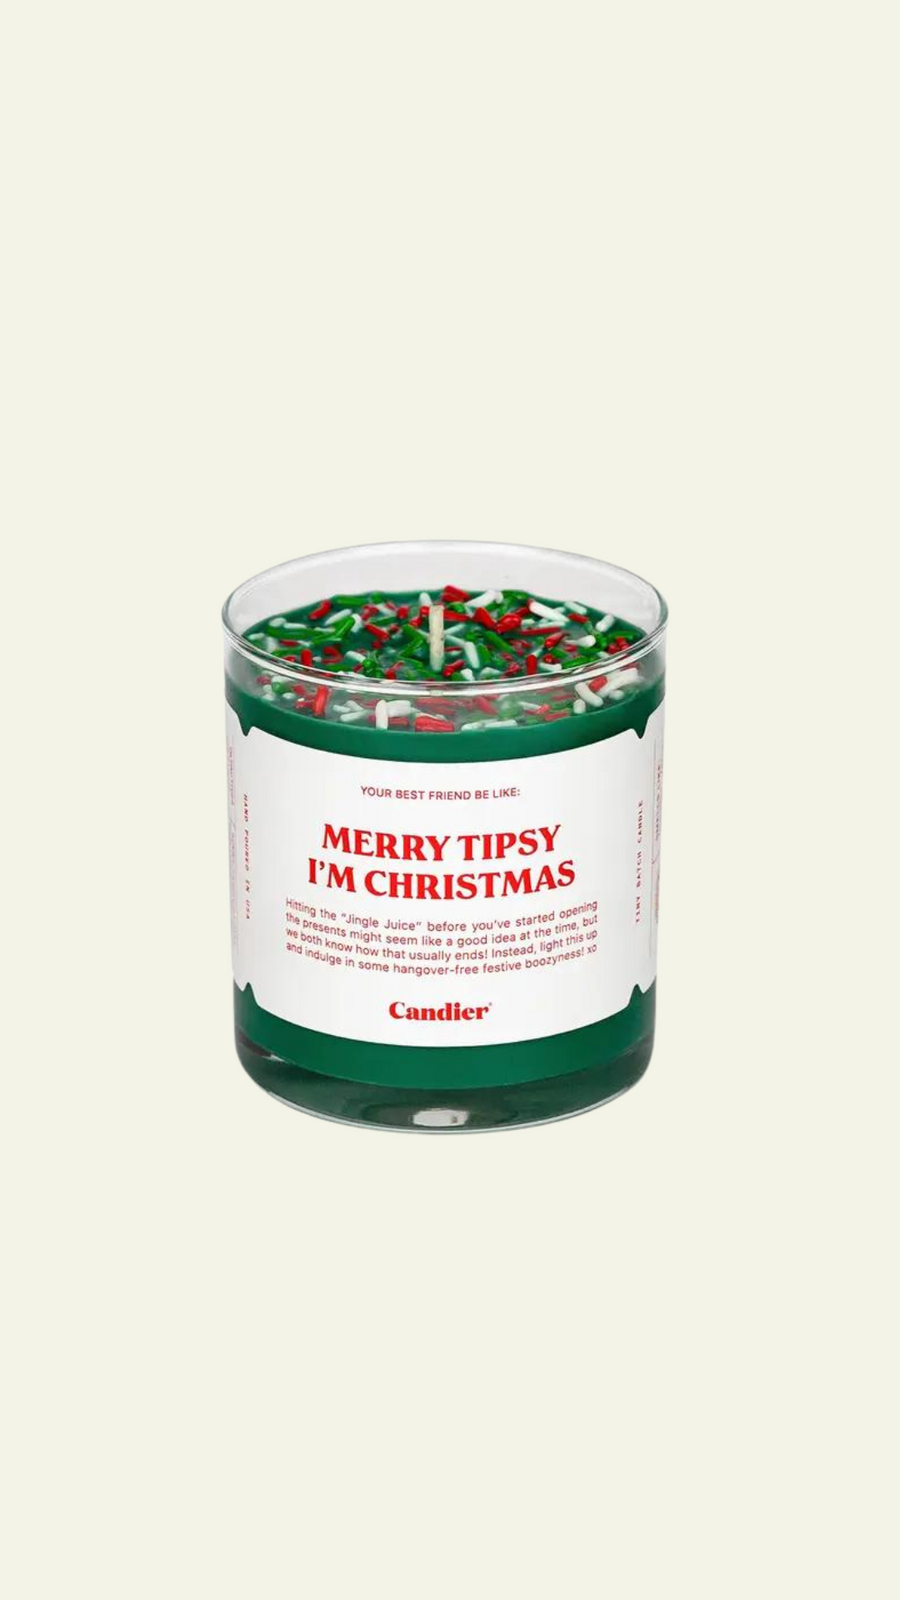 Merry Tipsy I’m Christmas Candle